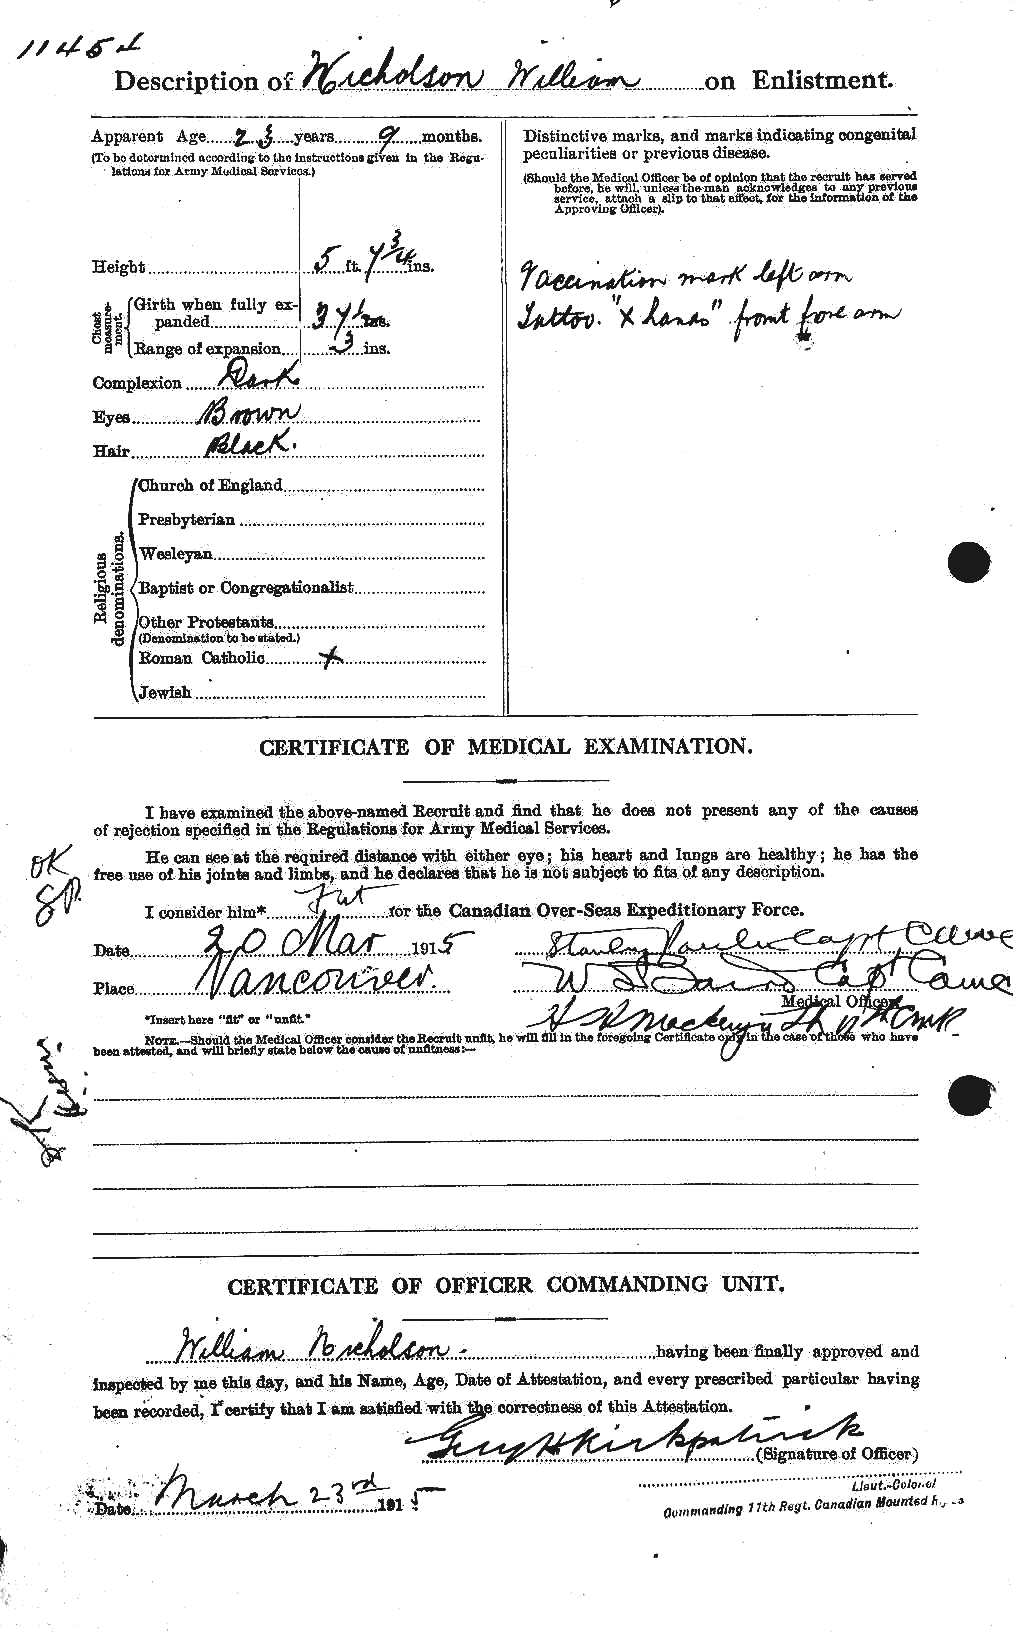 Personnel Records of the First World War - CEF 556489b